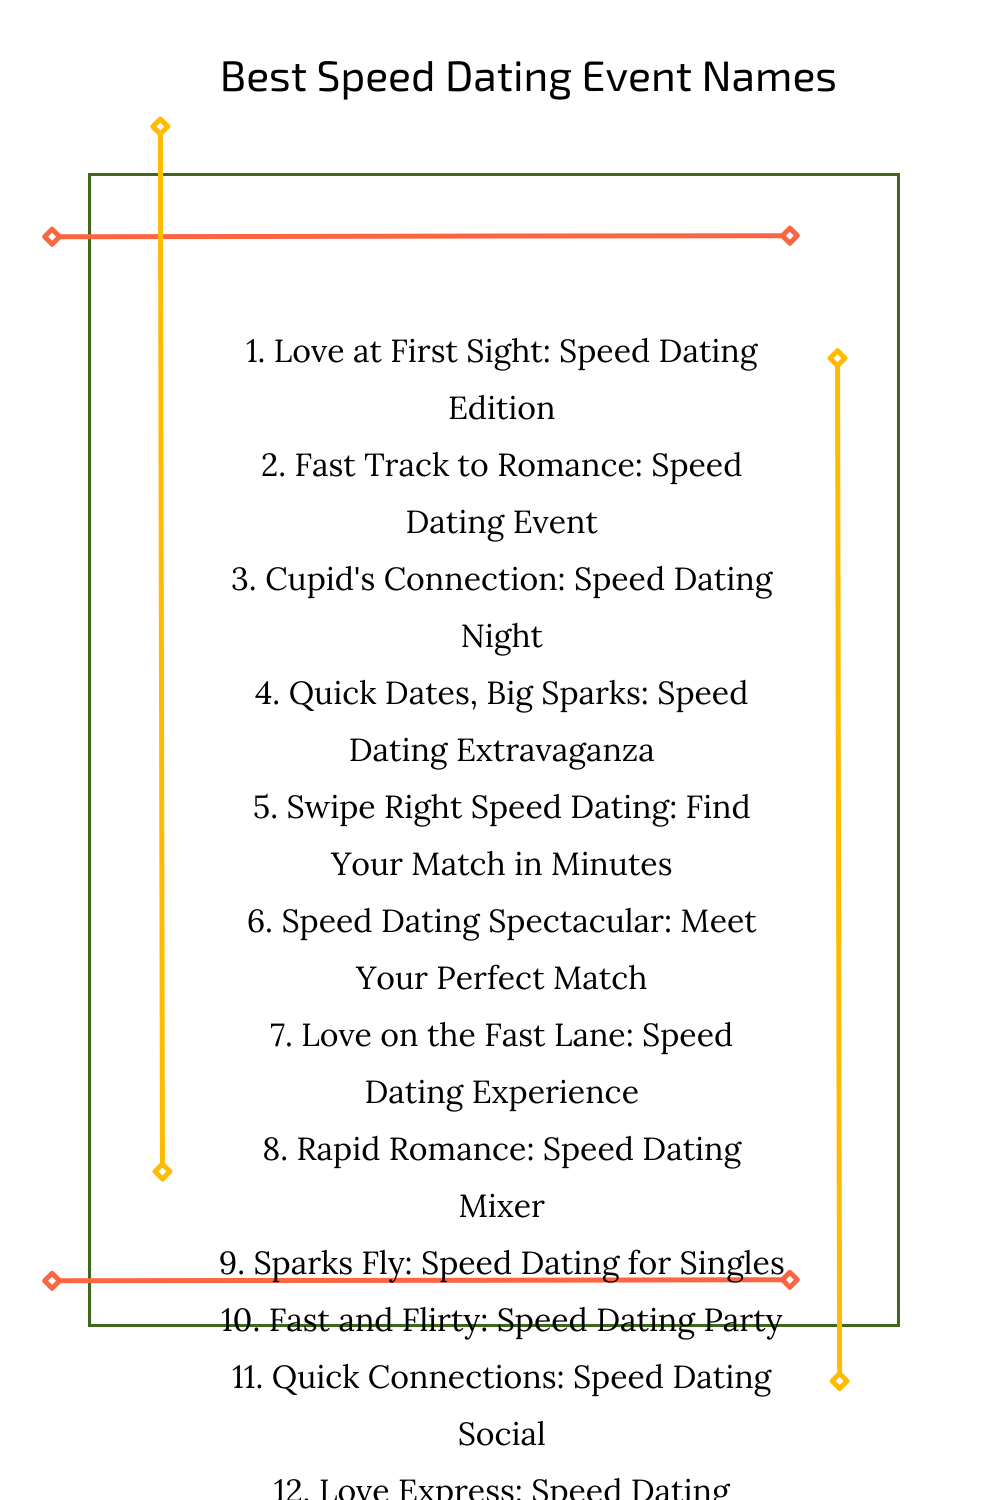 Best Speed Dating Event Names